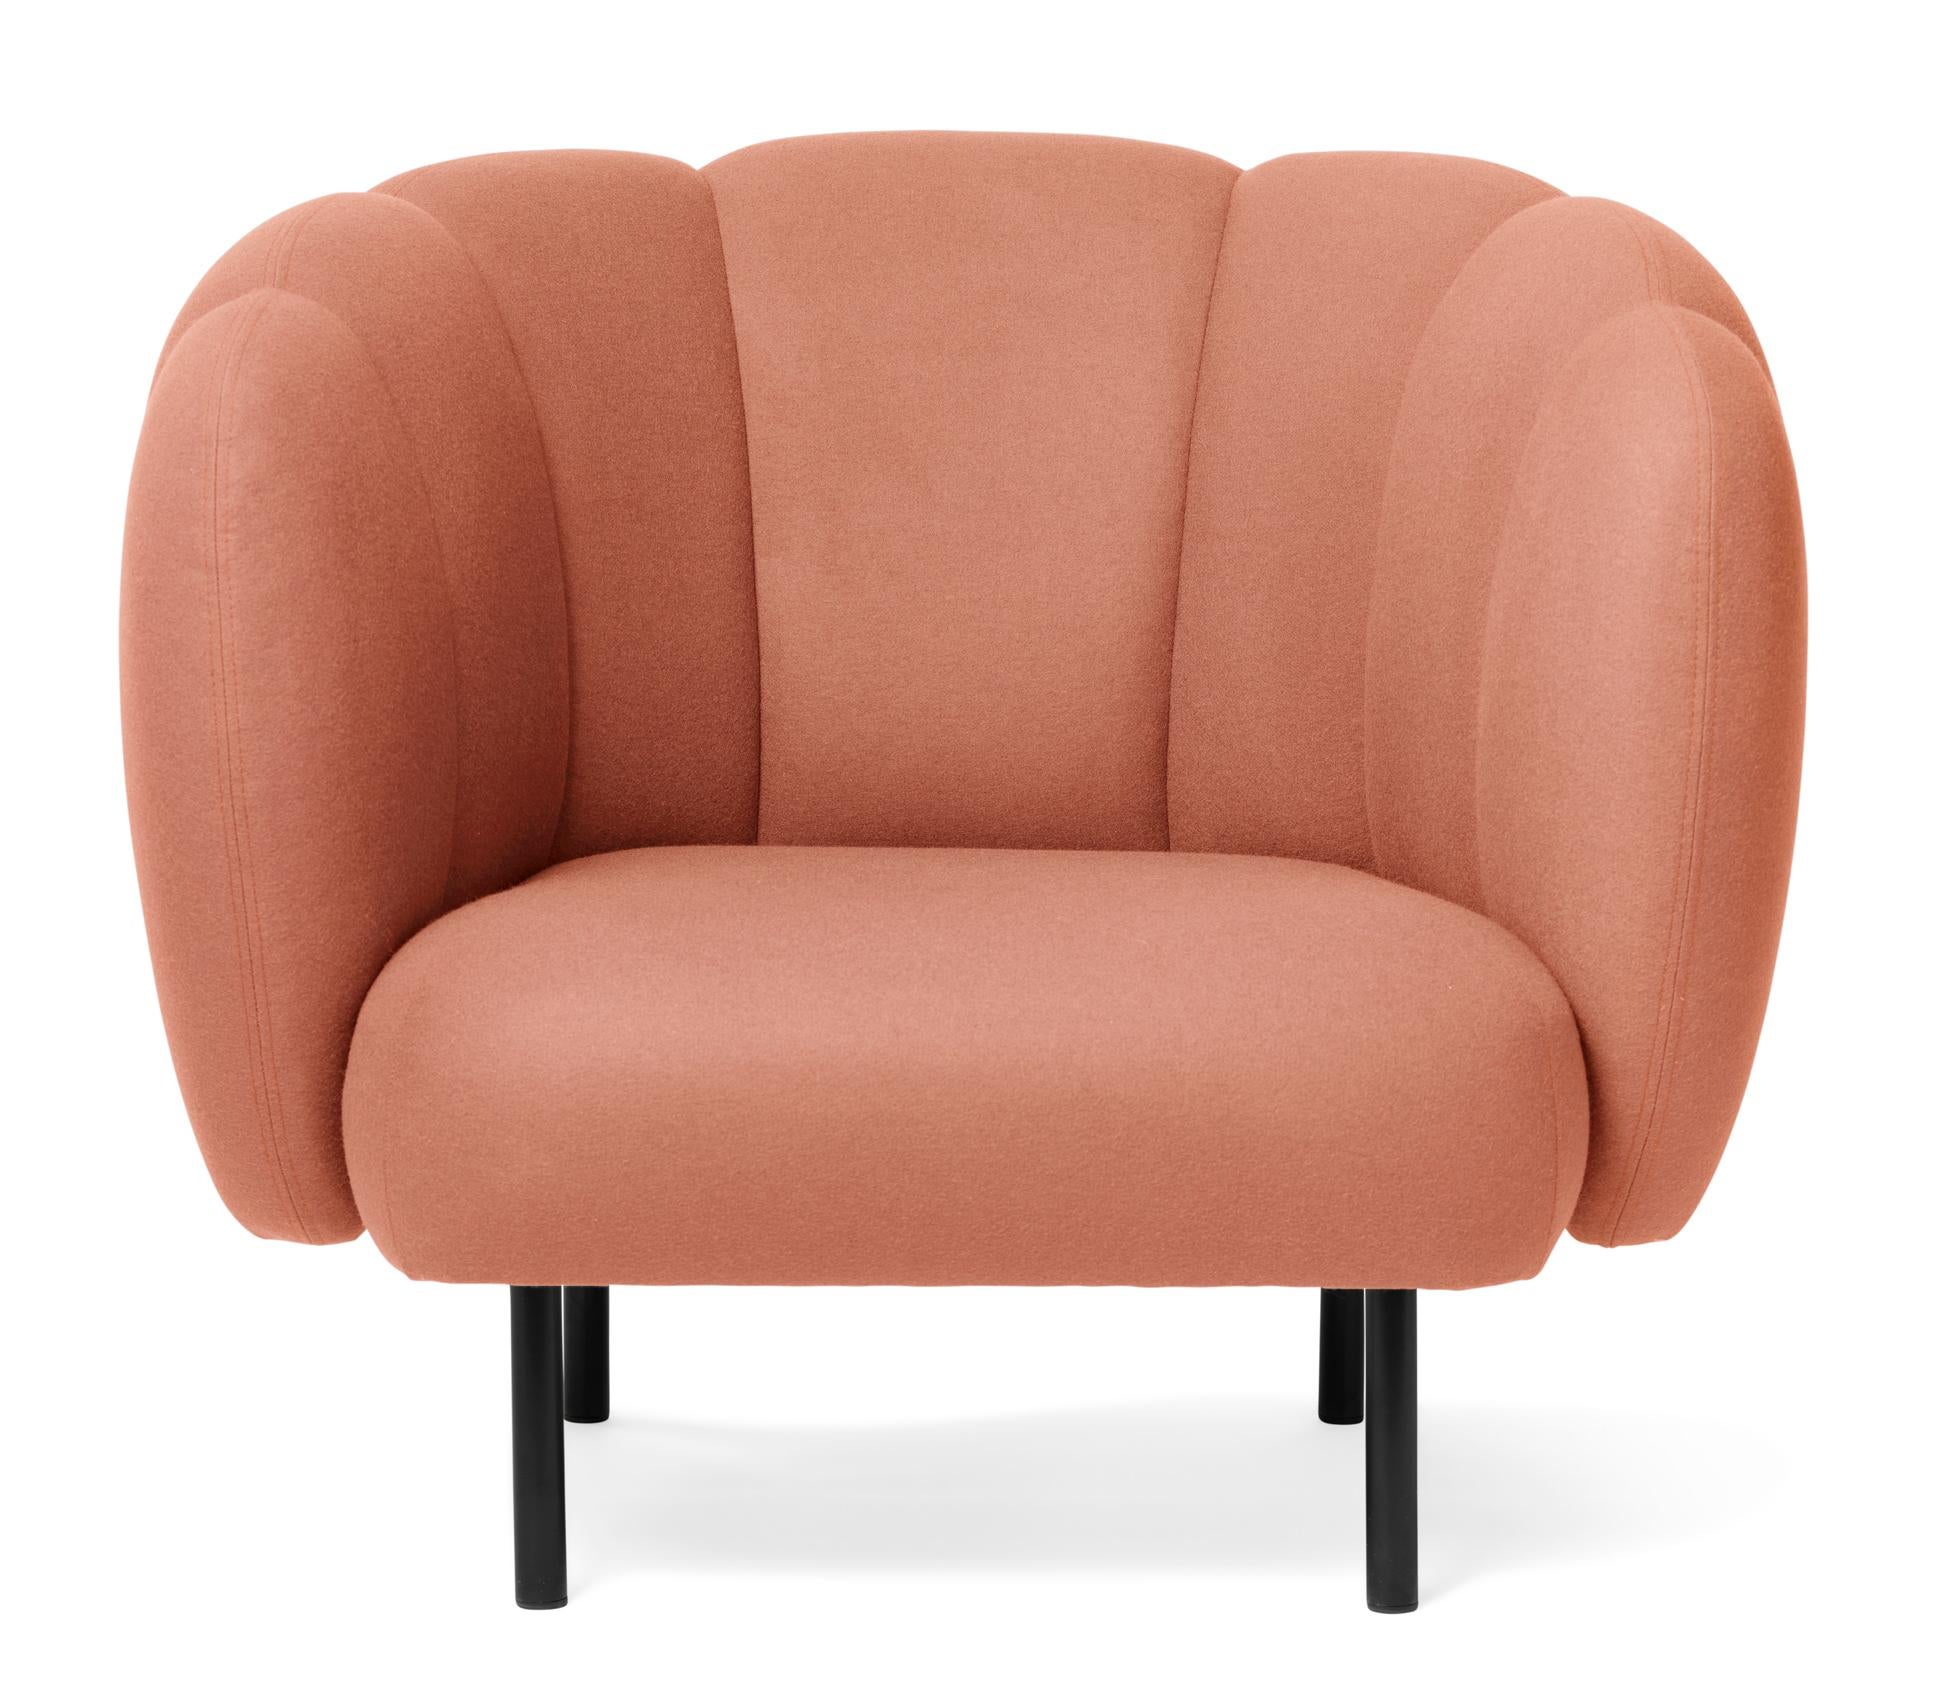 For Sale: Pink (Hero 511) Cape Lounge Chair with Stitches, by Charlotte Høncke from Warm Nordic